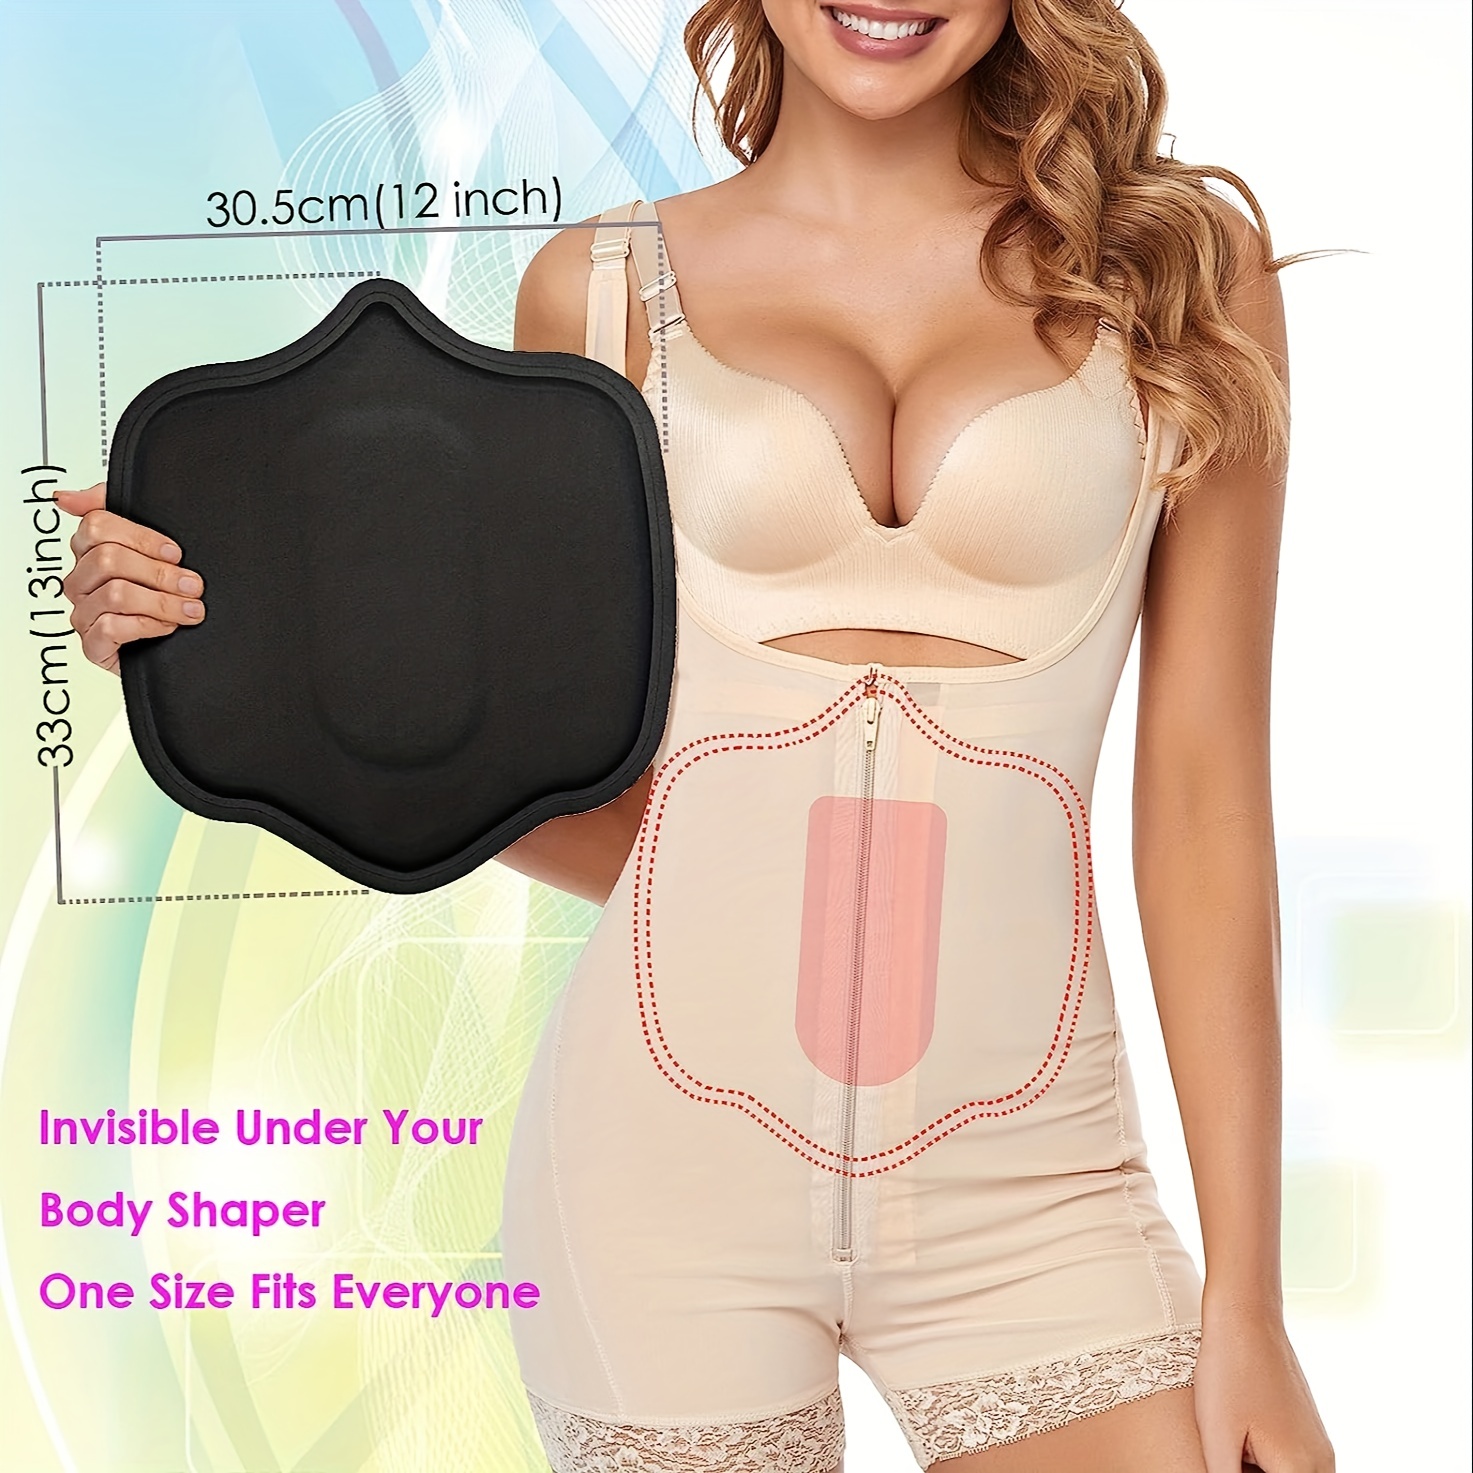 Moolida Waist Trainer Review: Does It Really Shape Your Waist